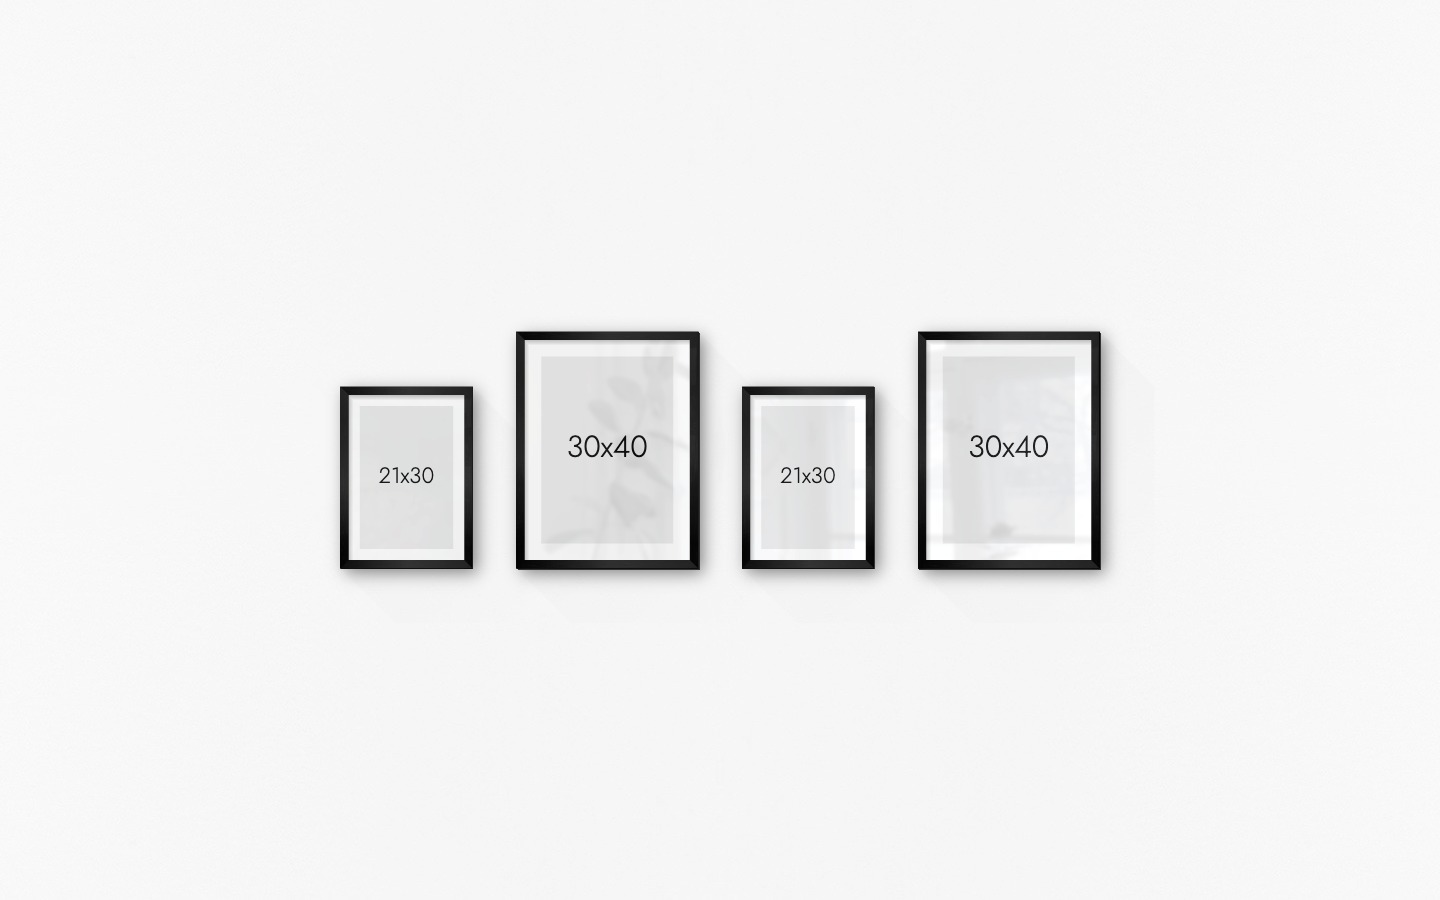 Gallery wall with picture frames in black in sizes 21x30 and 30x40